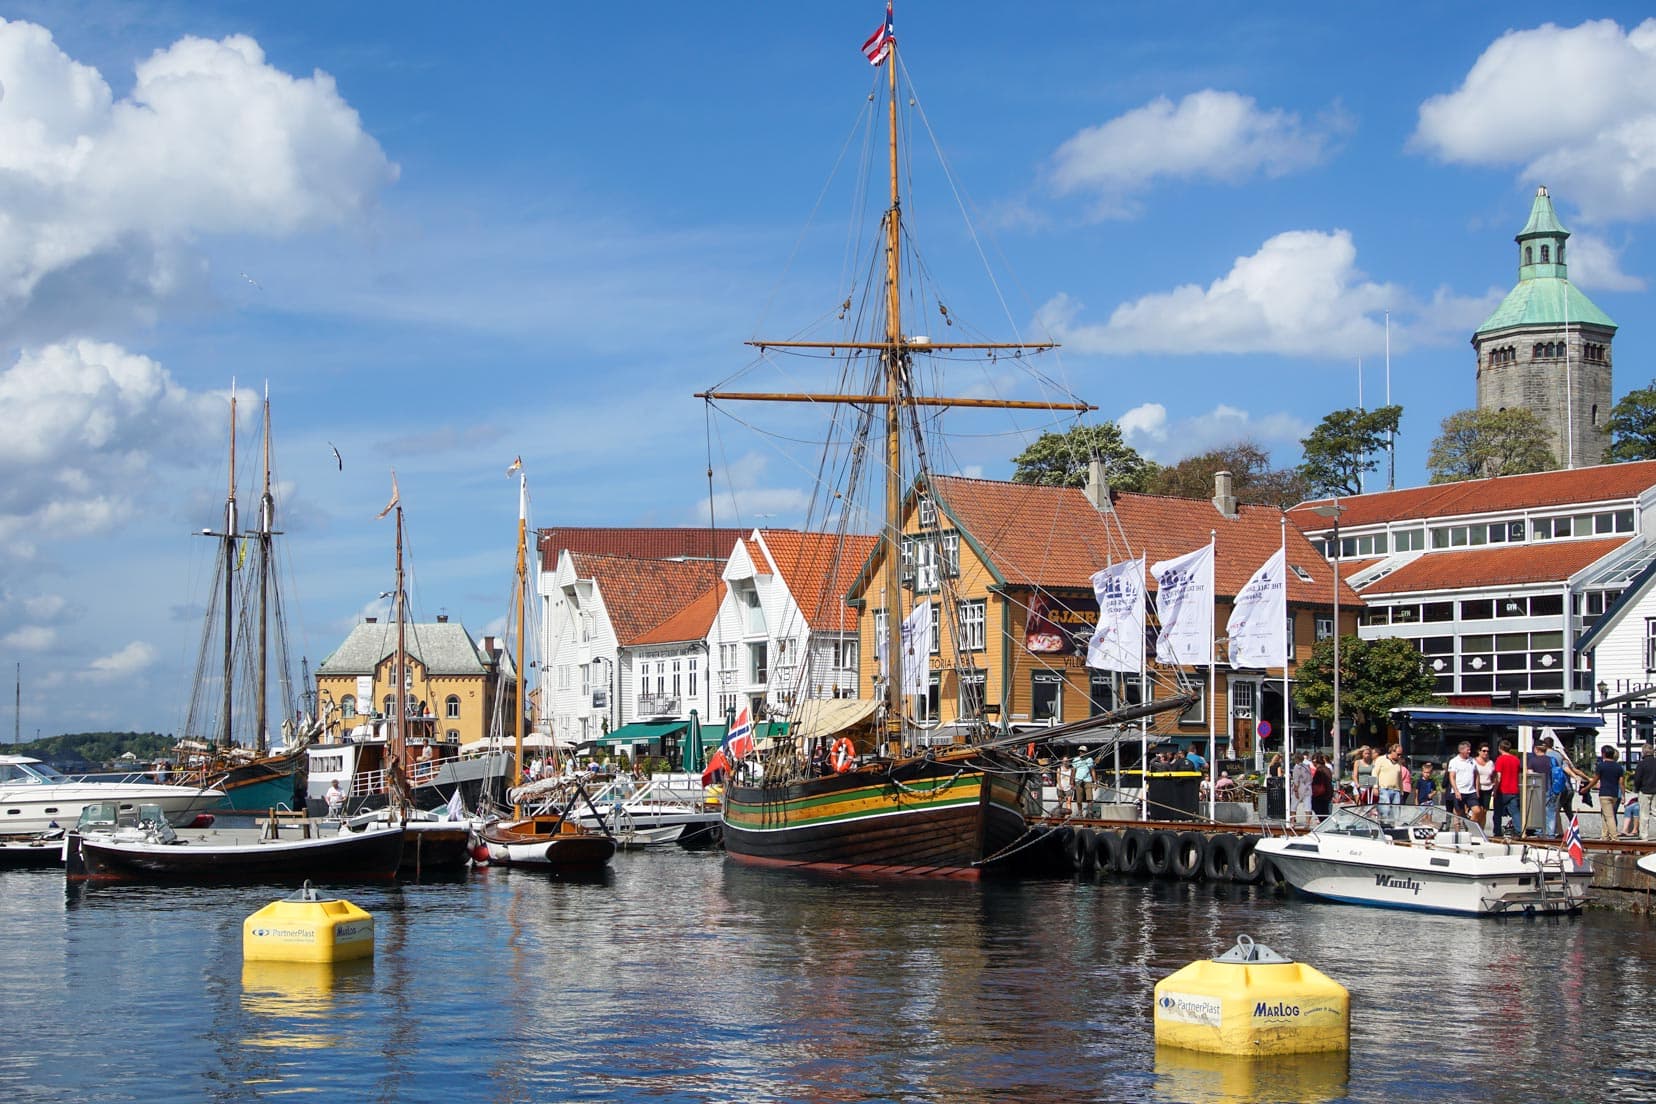 Harbourside at Stanavger with a tall ship and white timber buildings 